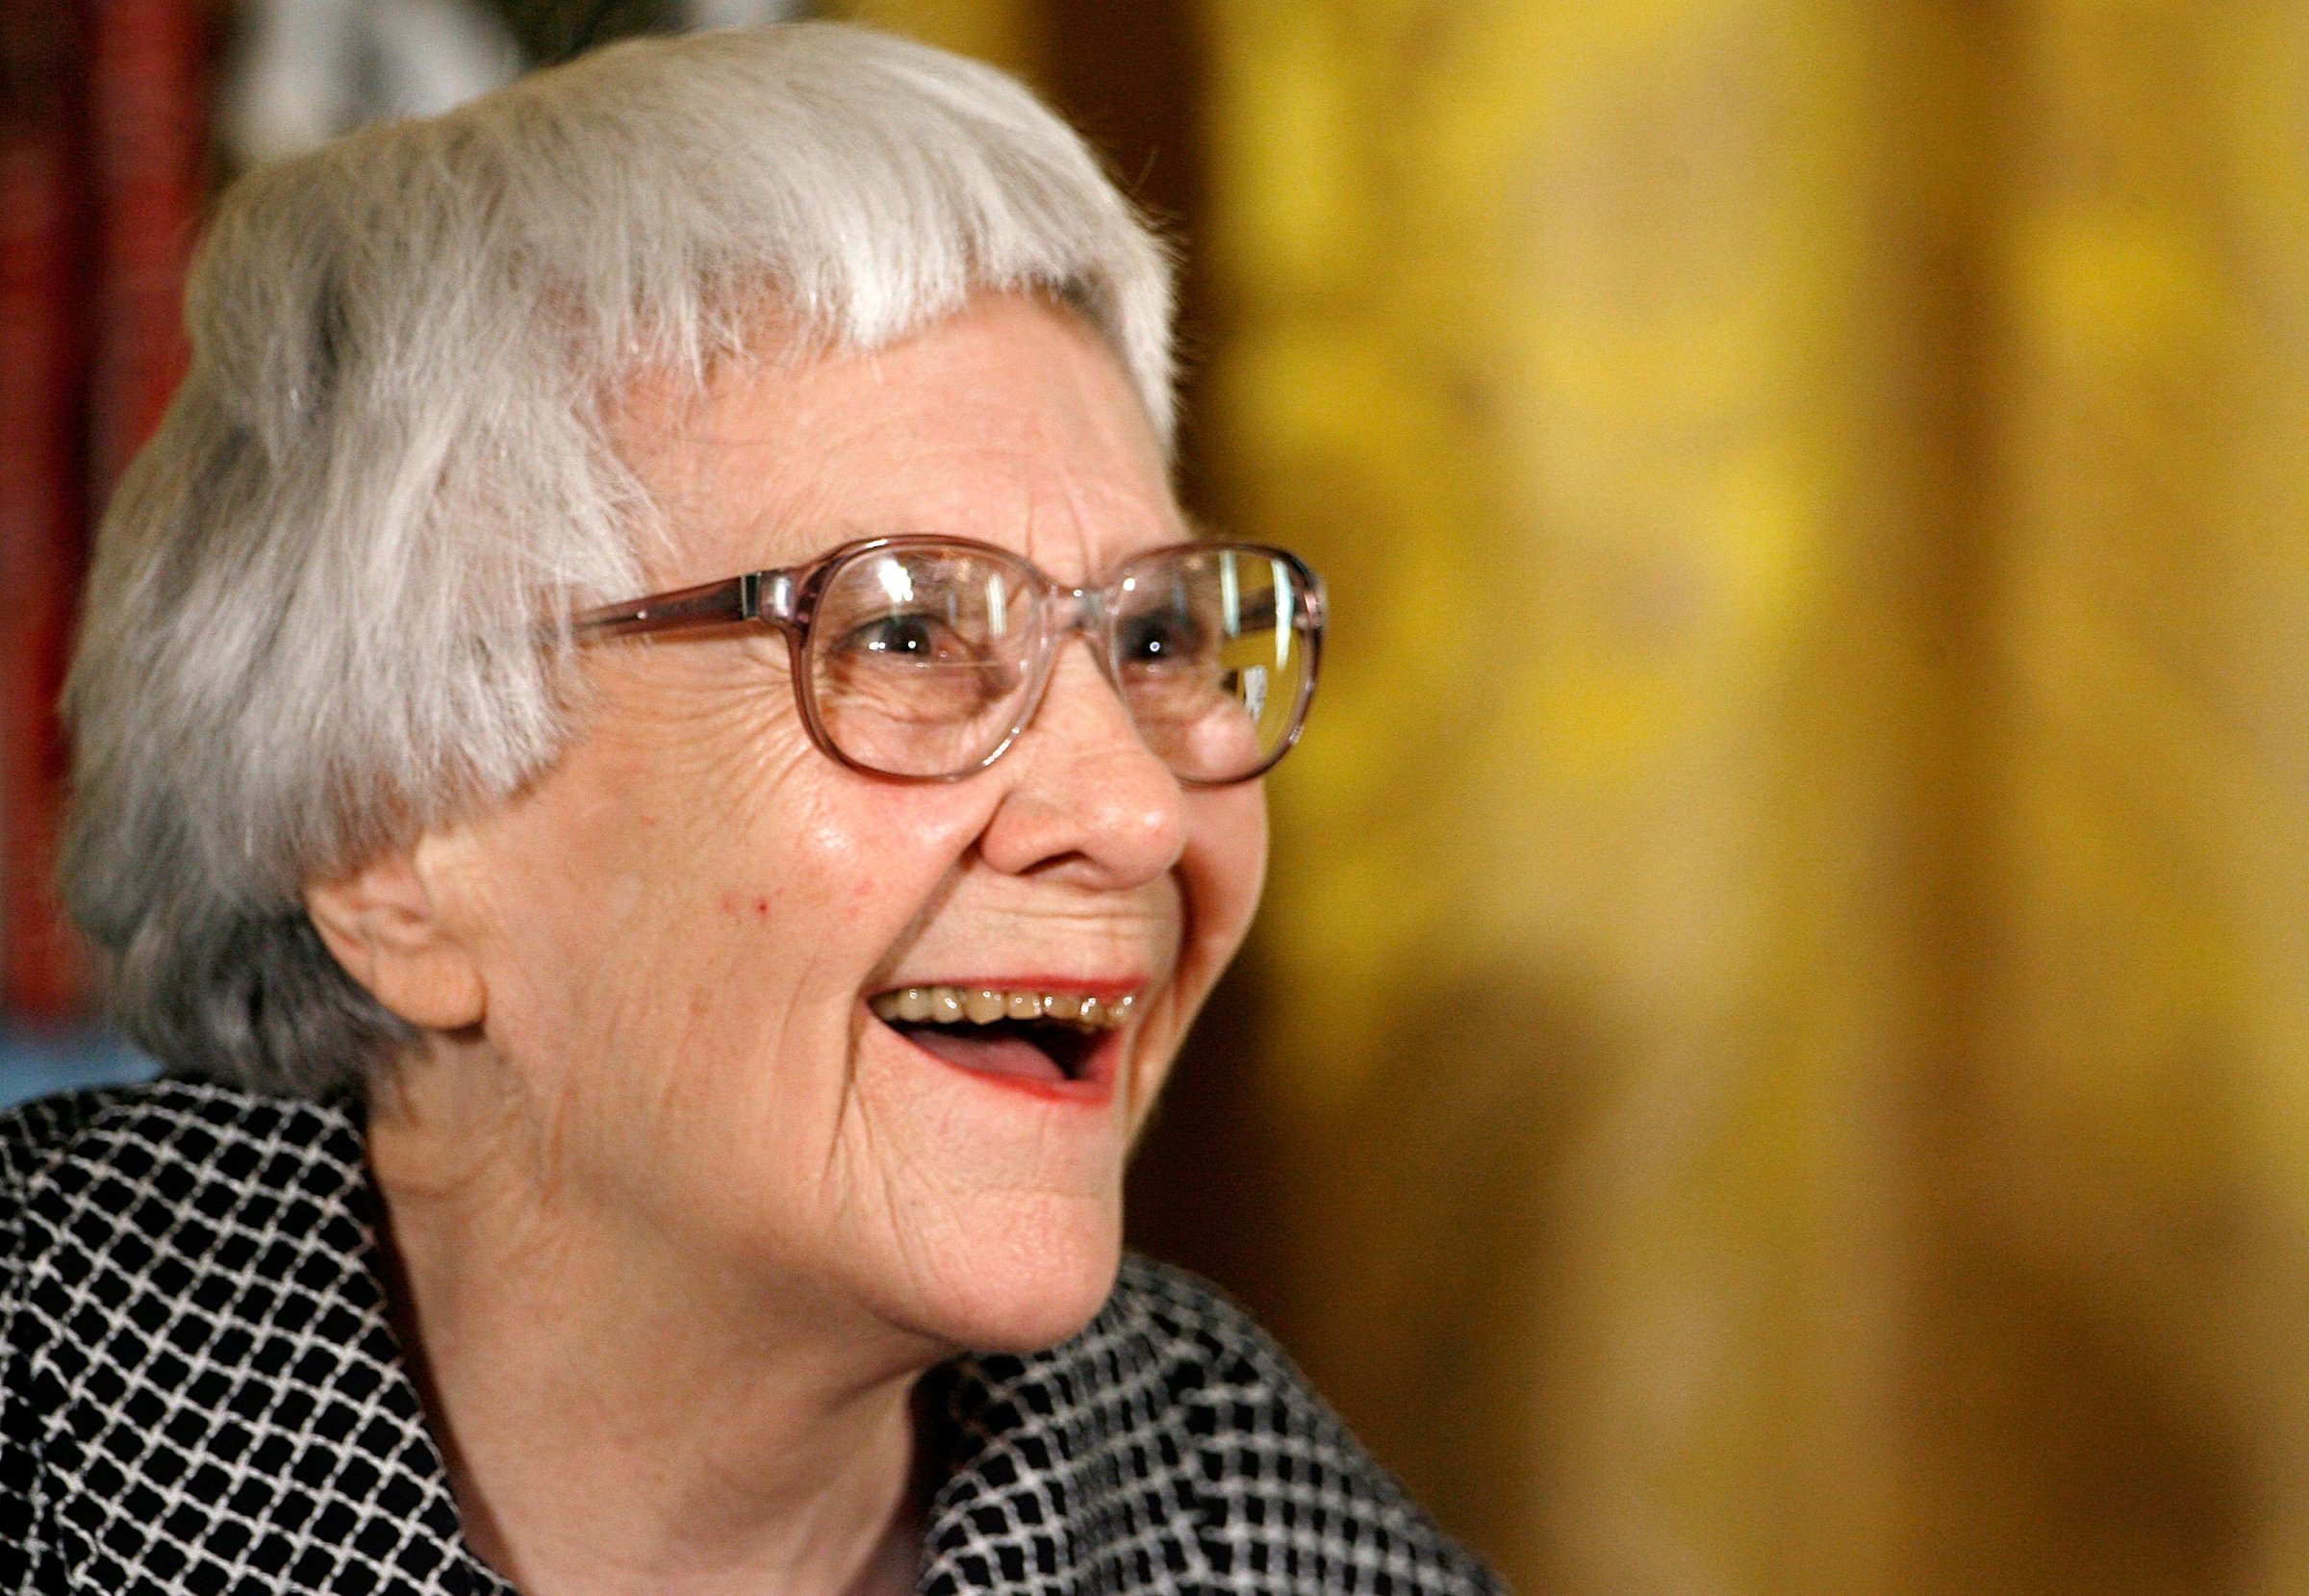 Pulitzer Prize winner and To Kill A Mockingbird author Harper Lee smiles before receiving the 2007 Presidential Medal of Freedom at the White House on Nov. 5, 2007 in Washington, DC.